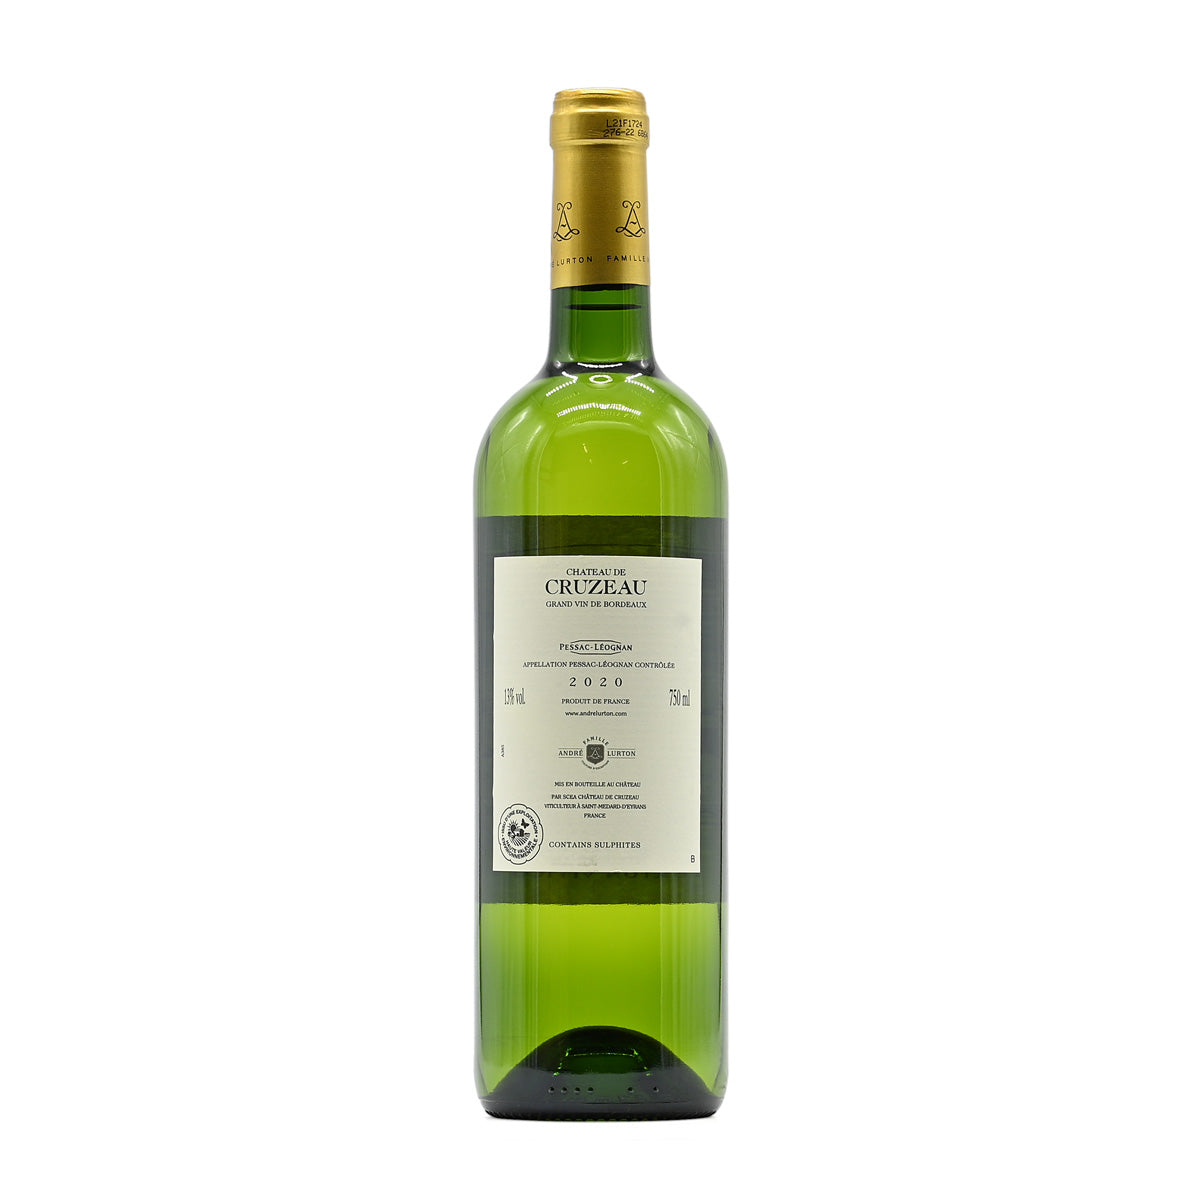 Chateau de Cruzeau Blanc 2020, 750ml French white wine, made from Sauvignon Blanc, from Pessac Leognan, Bordeaux, France – GDV Fine Wines, Hong Kong